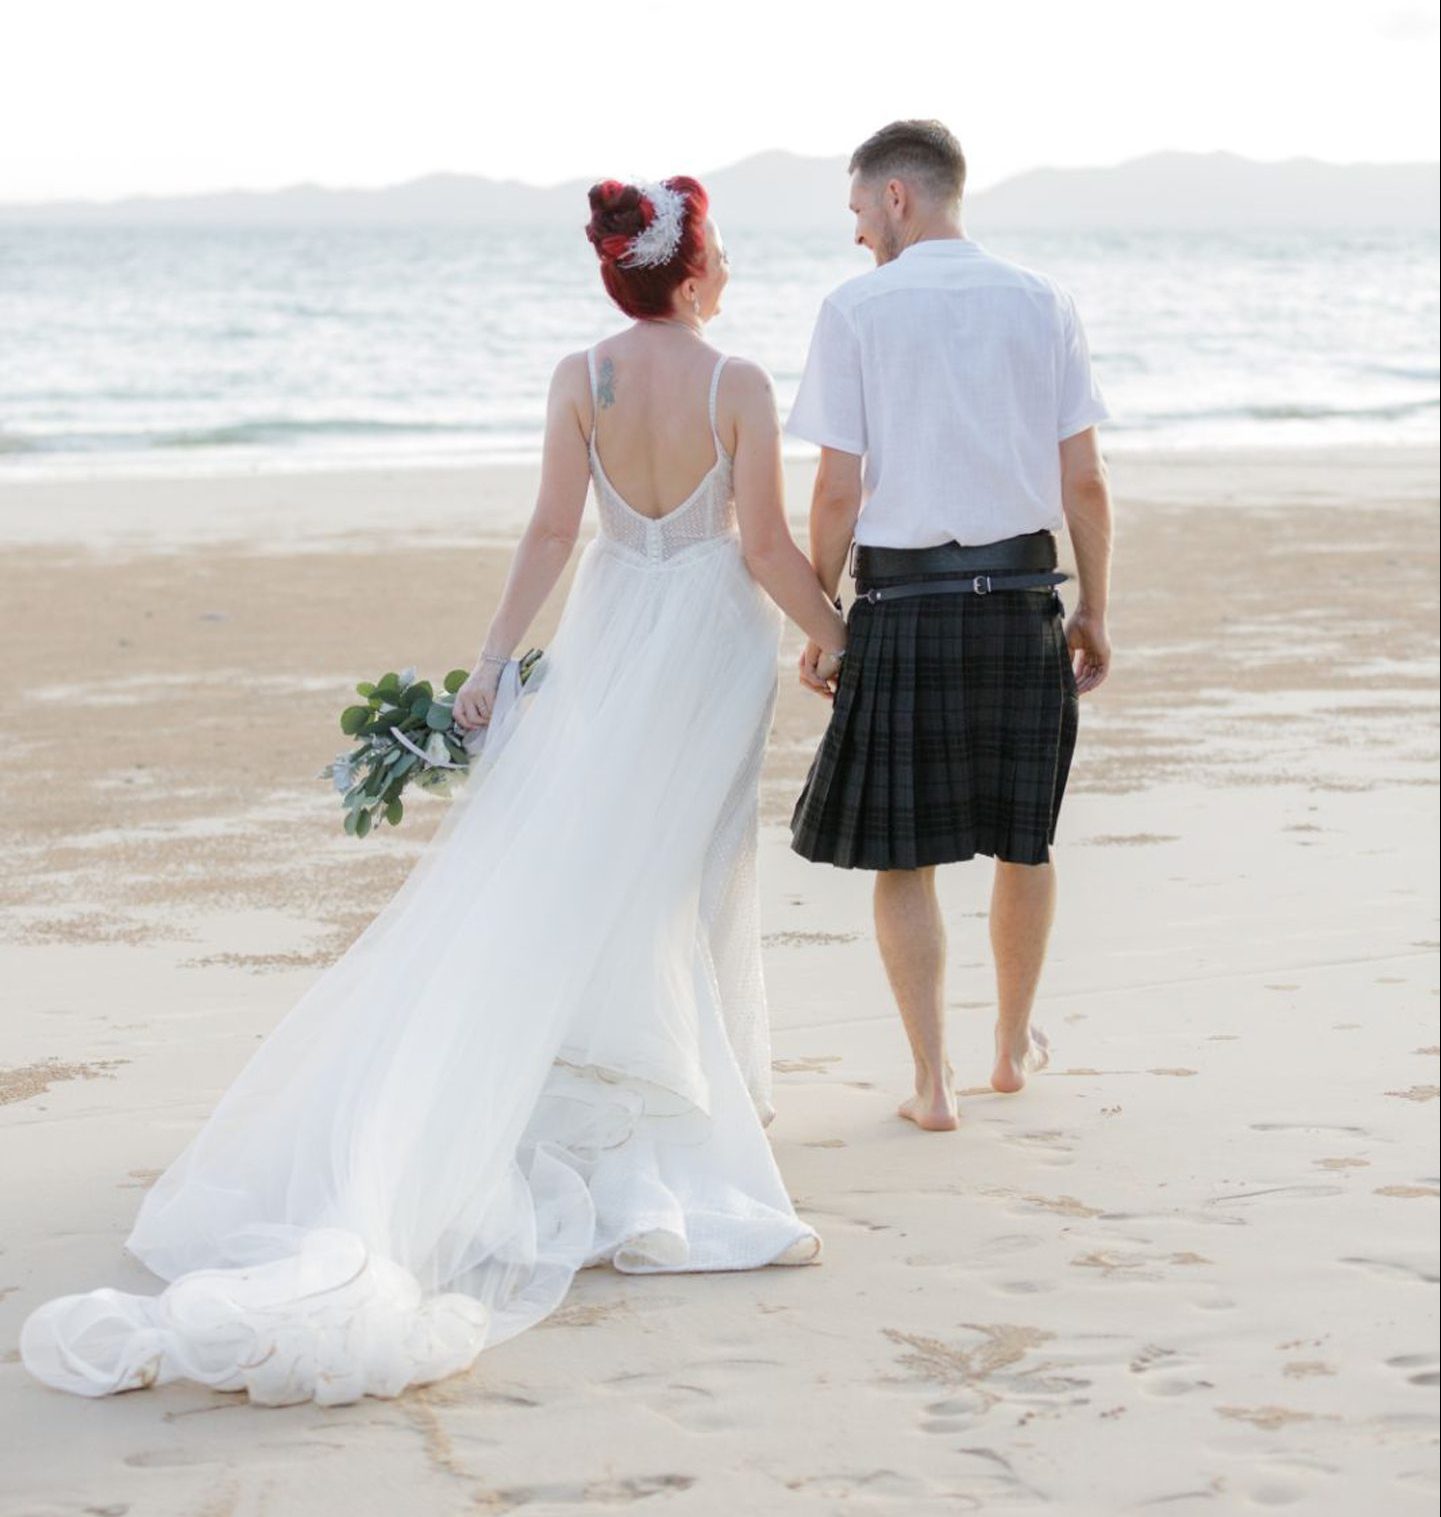 Elaine and Marc Walker on the beach in their wedding dress/kilt on their wedding day in Thailand.